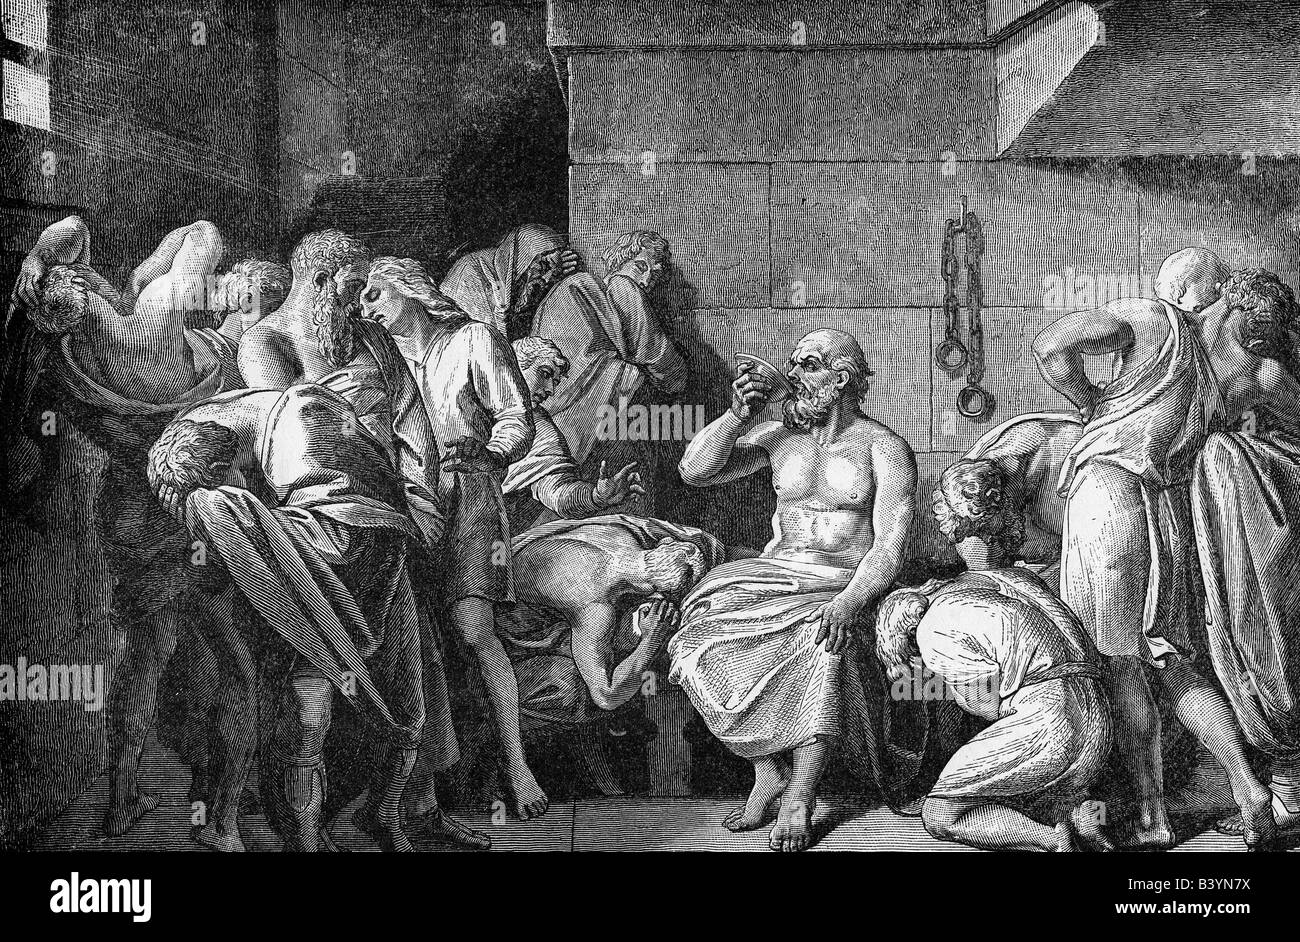 Socrates, 469 - 399 BC, Greek philosopher, 'Death of Socrates', print after copper engraving, 19th century, Artist's Copyright has not to be cleared Stock Photo